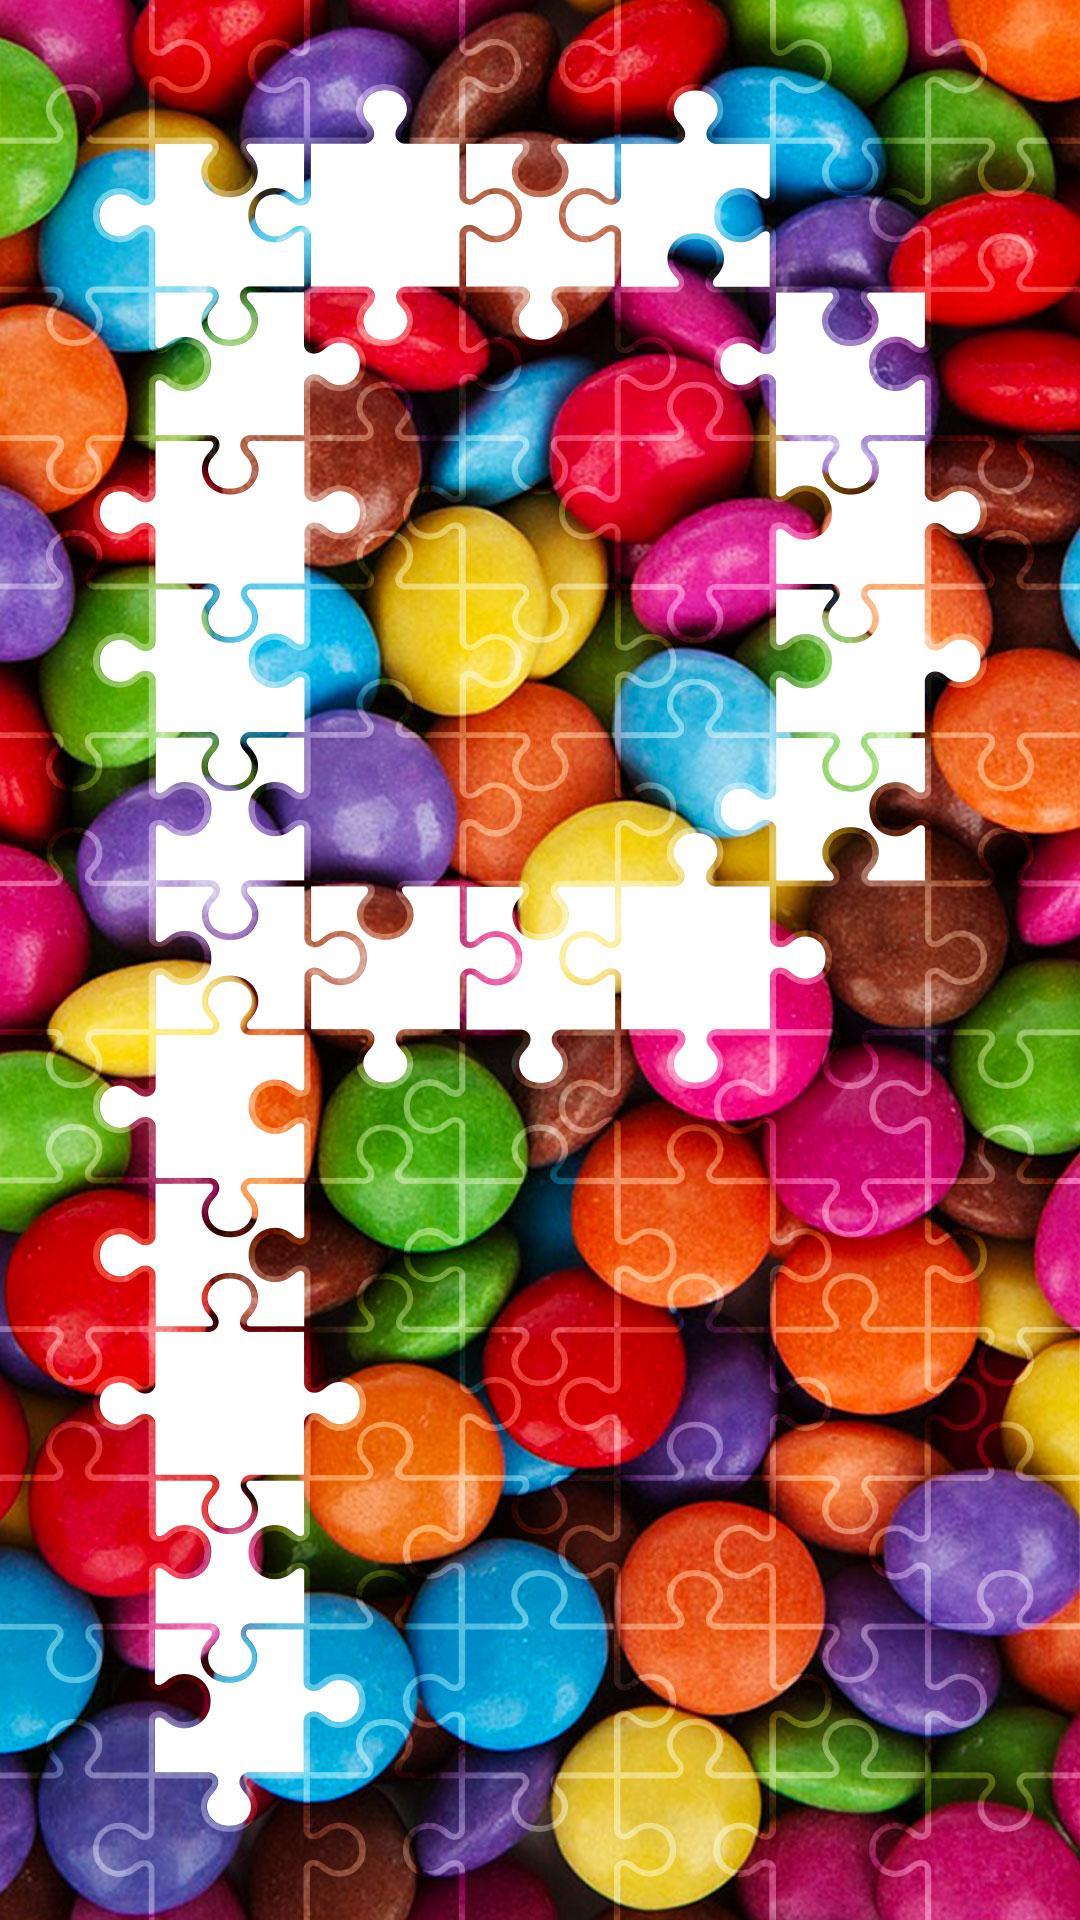 Free Jigsaw Puzzles for Android - APK Download